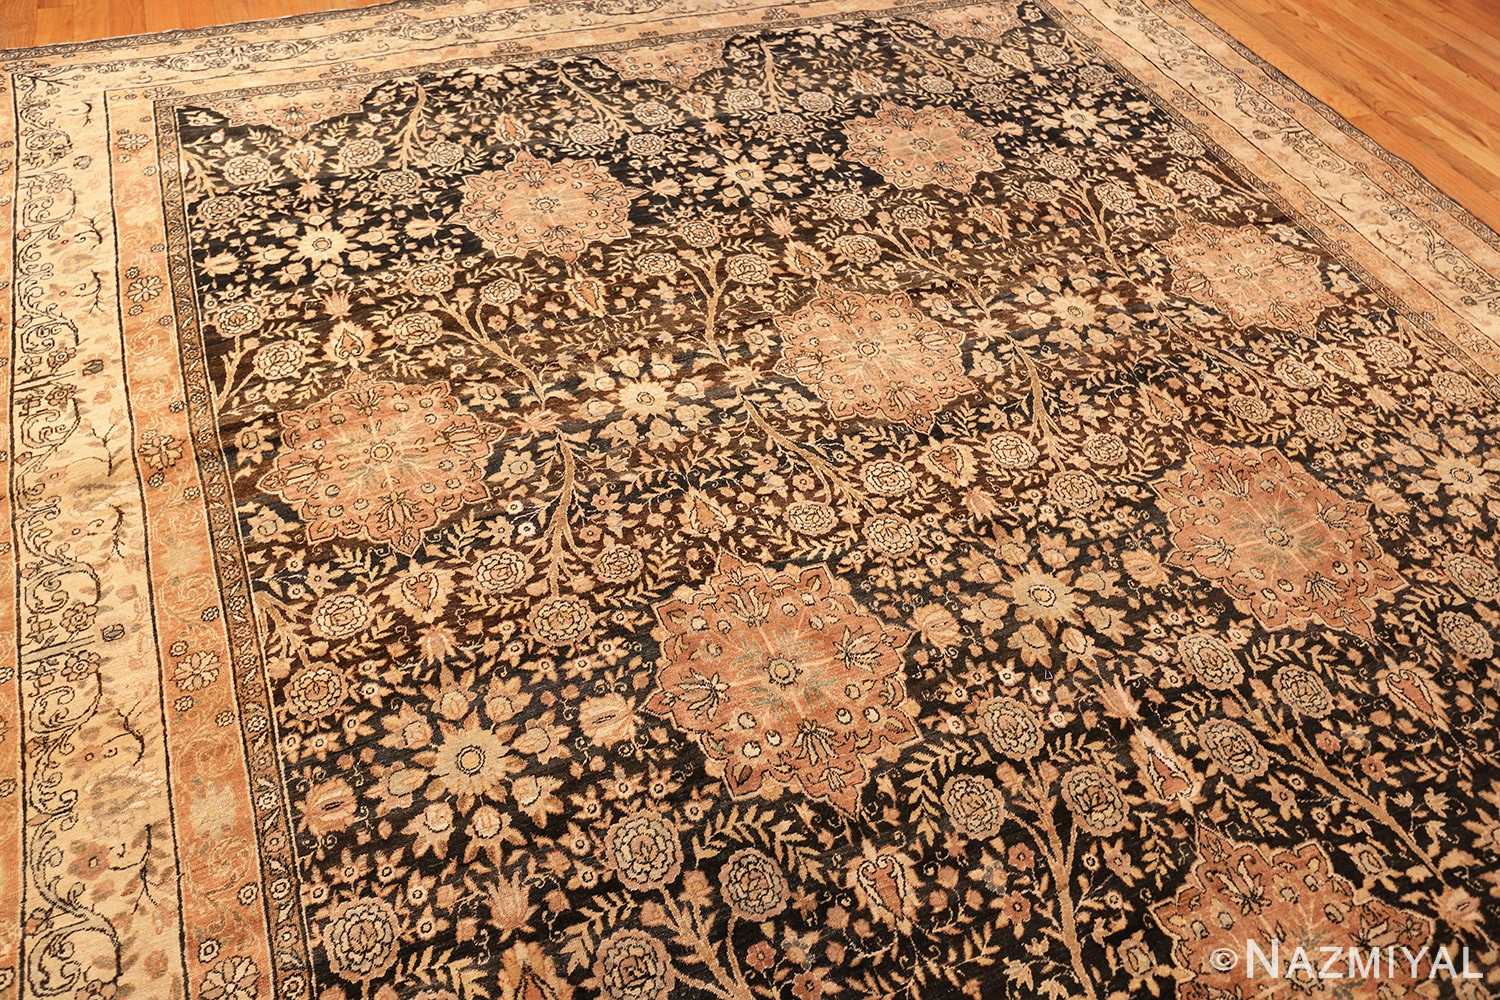 Field Picture of An Antique Persian Kerman Rug by Nazmiyal